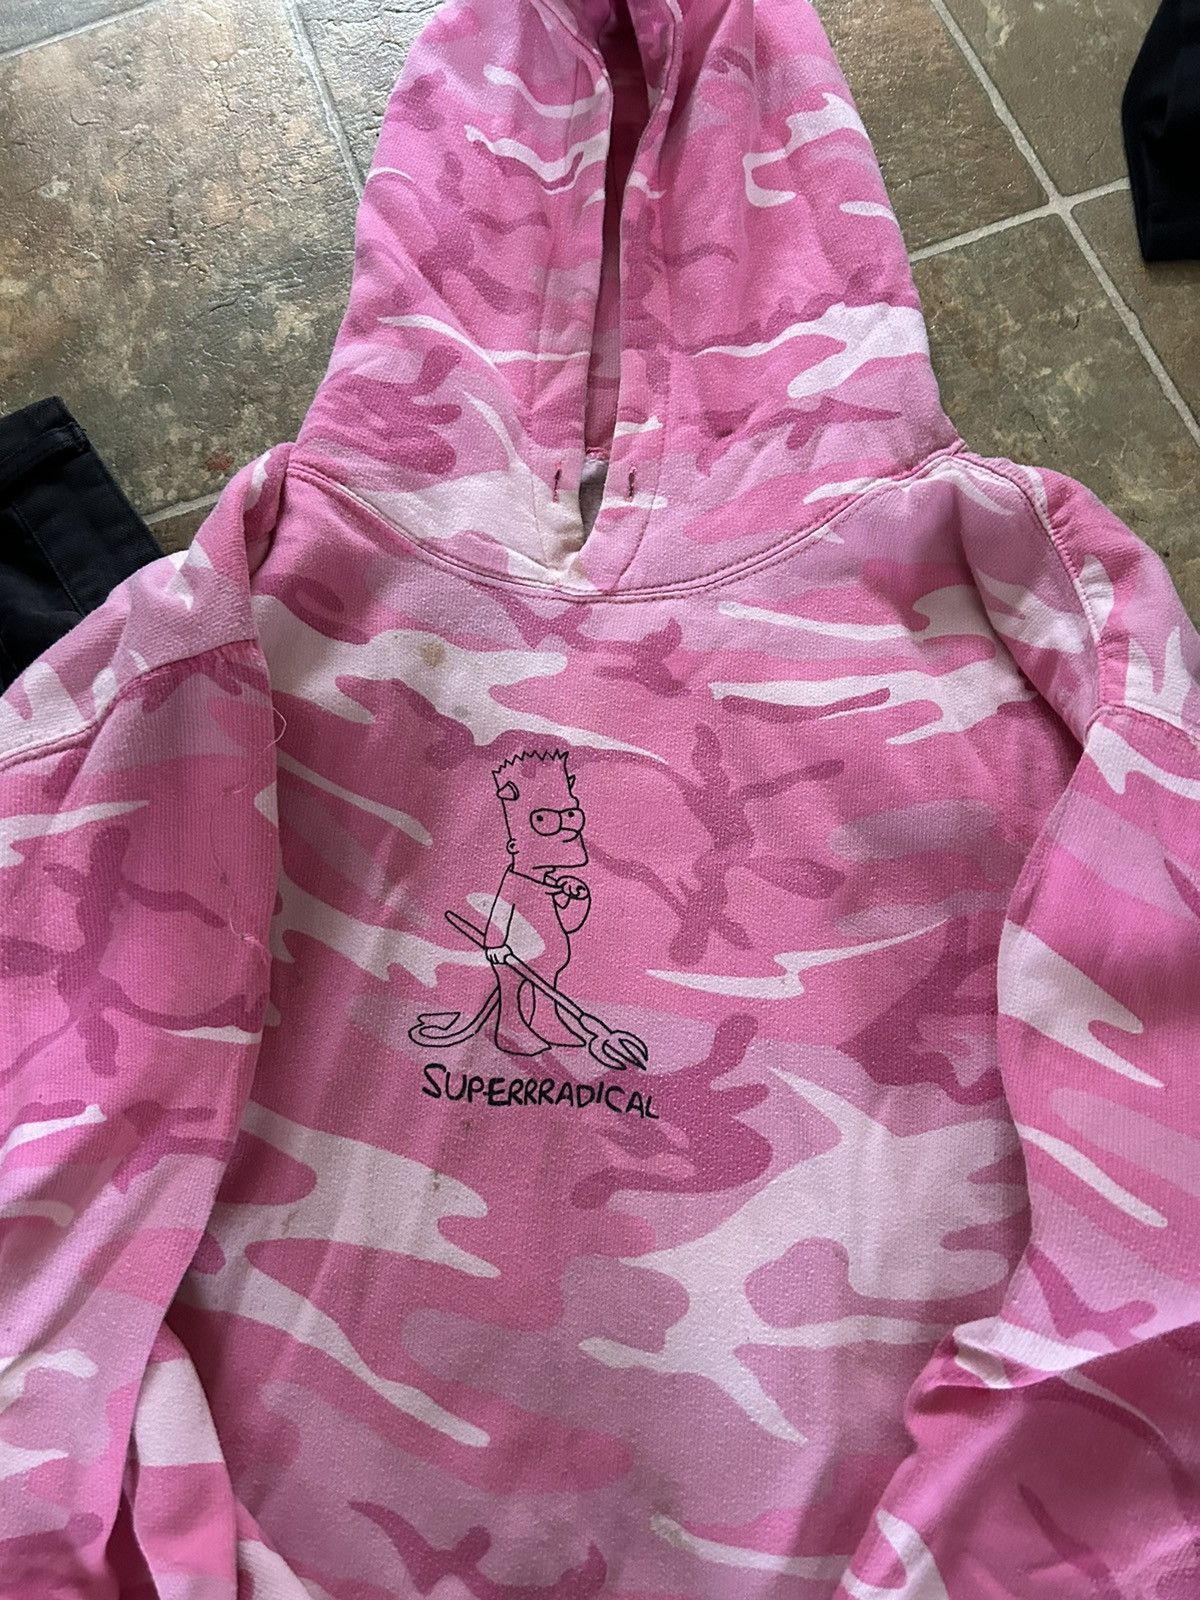 Superrradical Pink Bart hoodie Size US XXL / EU 58 / 5 - 2 Preview